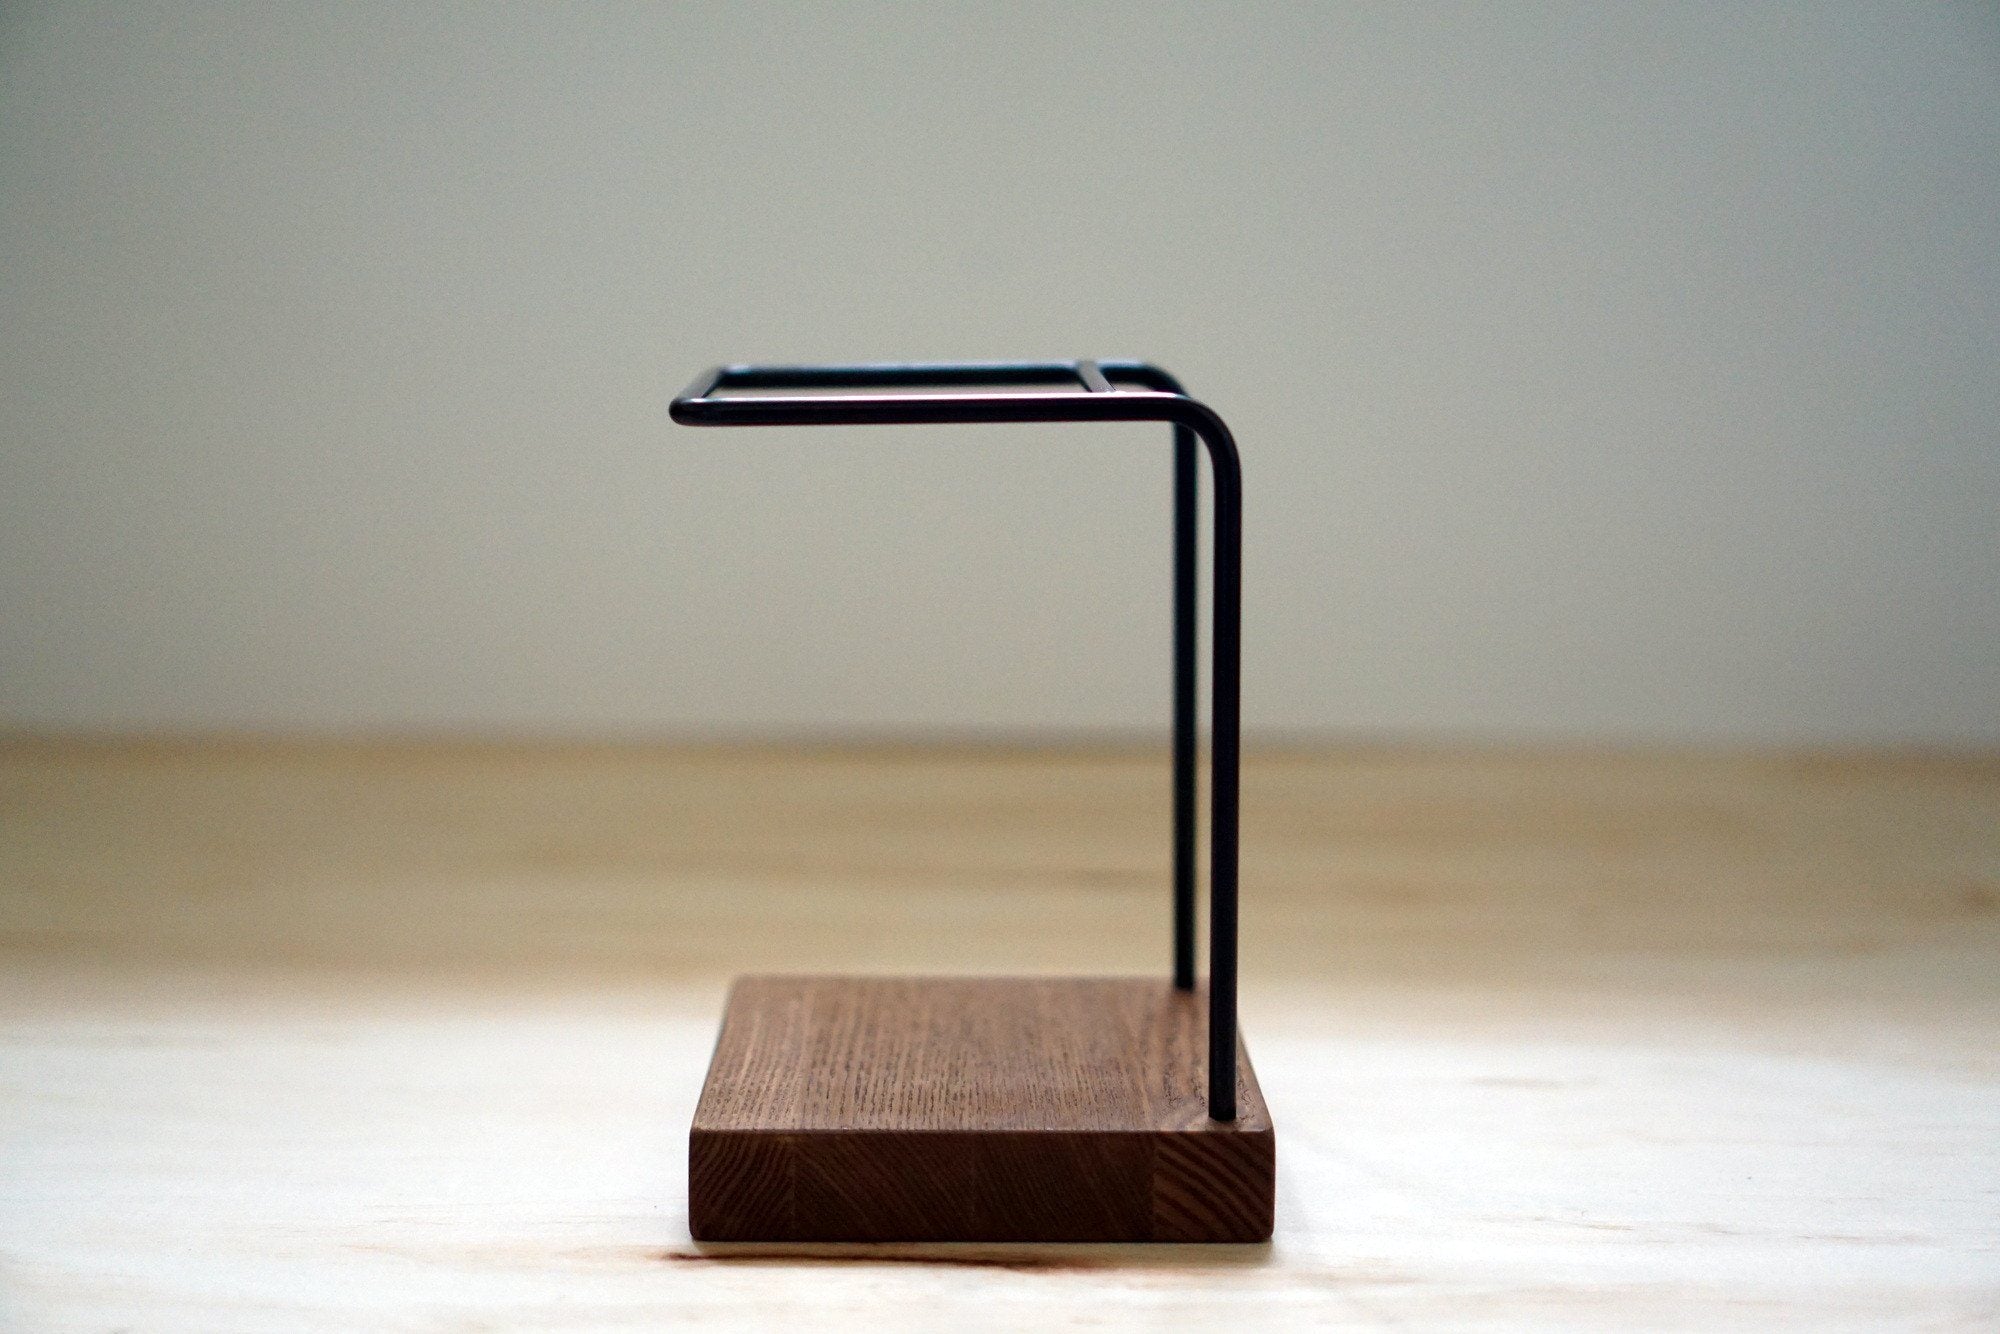 Halo Coffee Dripper Stand Stand Halo Halo Coffee Dripper 